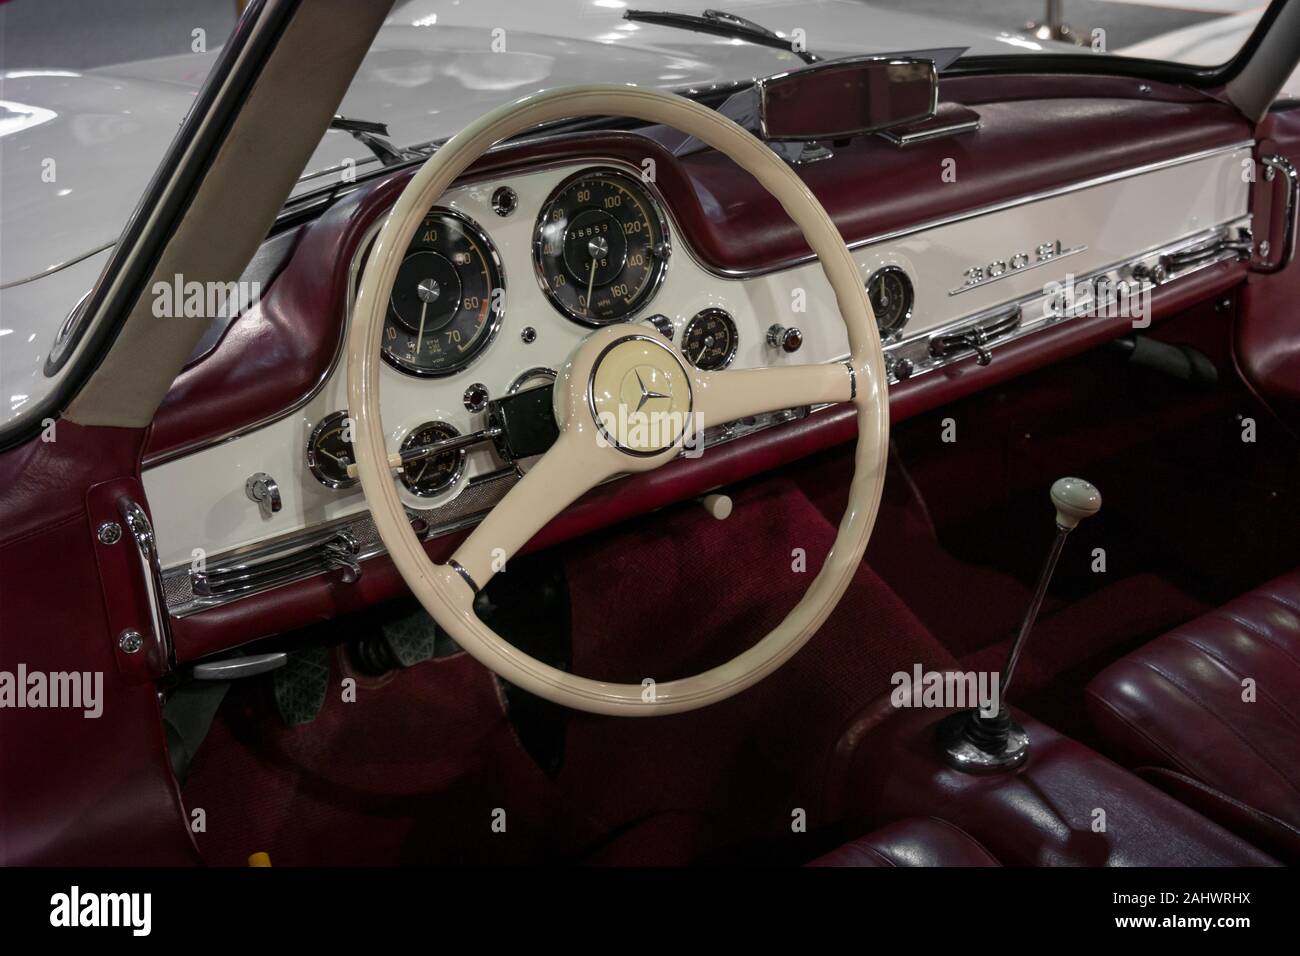 Interior design of a classic and vintage Mercedes Benz in maroon and white  Stock Photo - Alamy